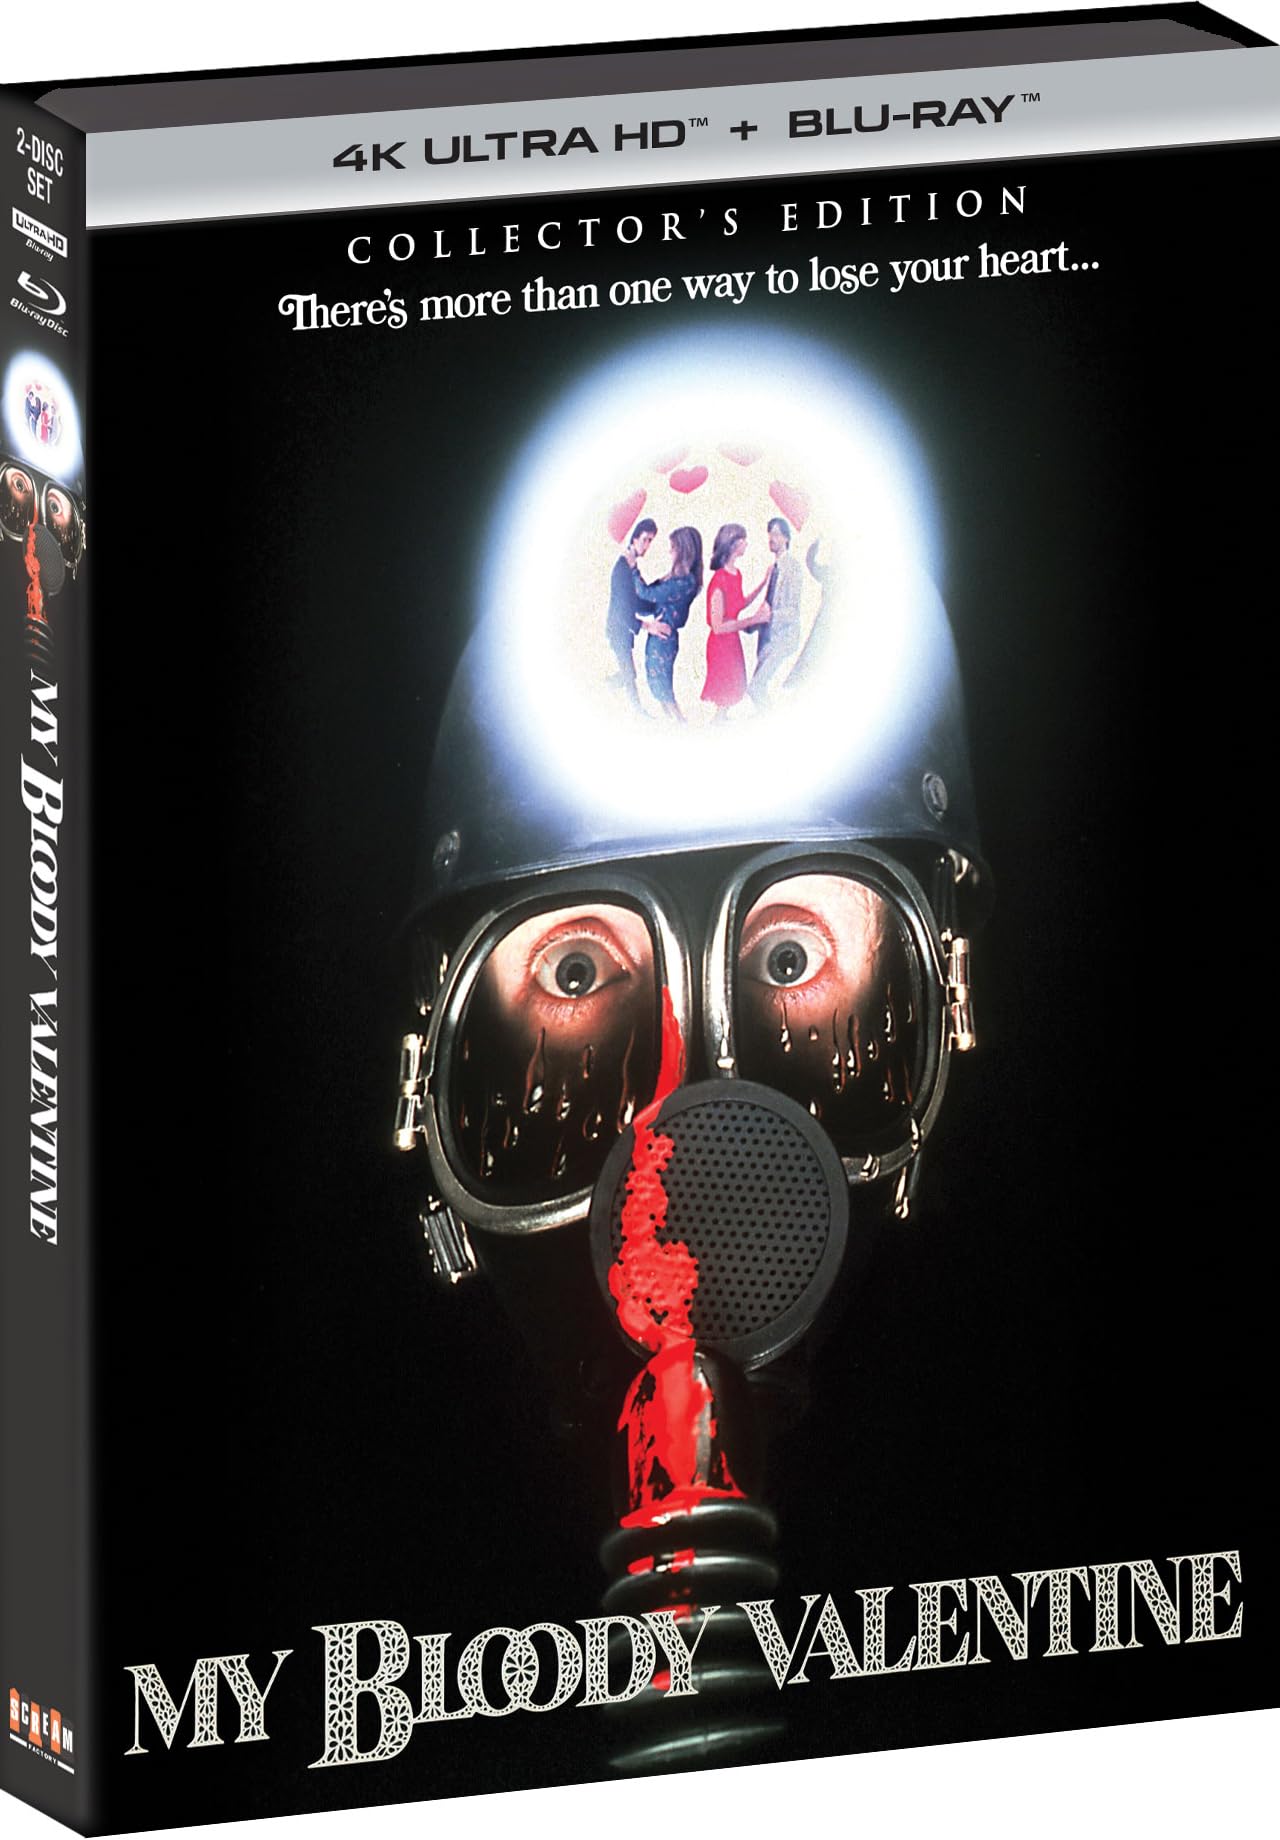 My Bloody Valentine (1981) – Collector’s Edition (4K-UHD) on MovieShack